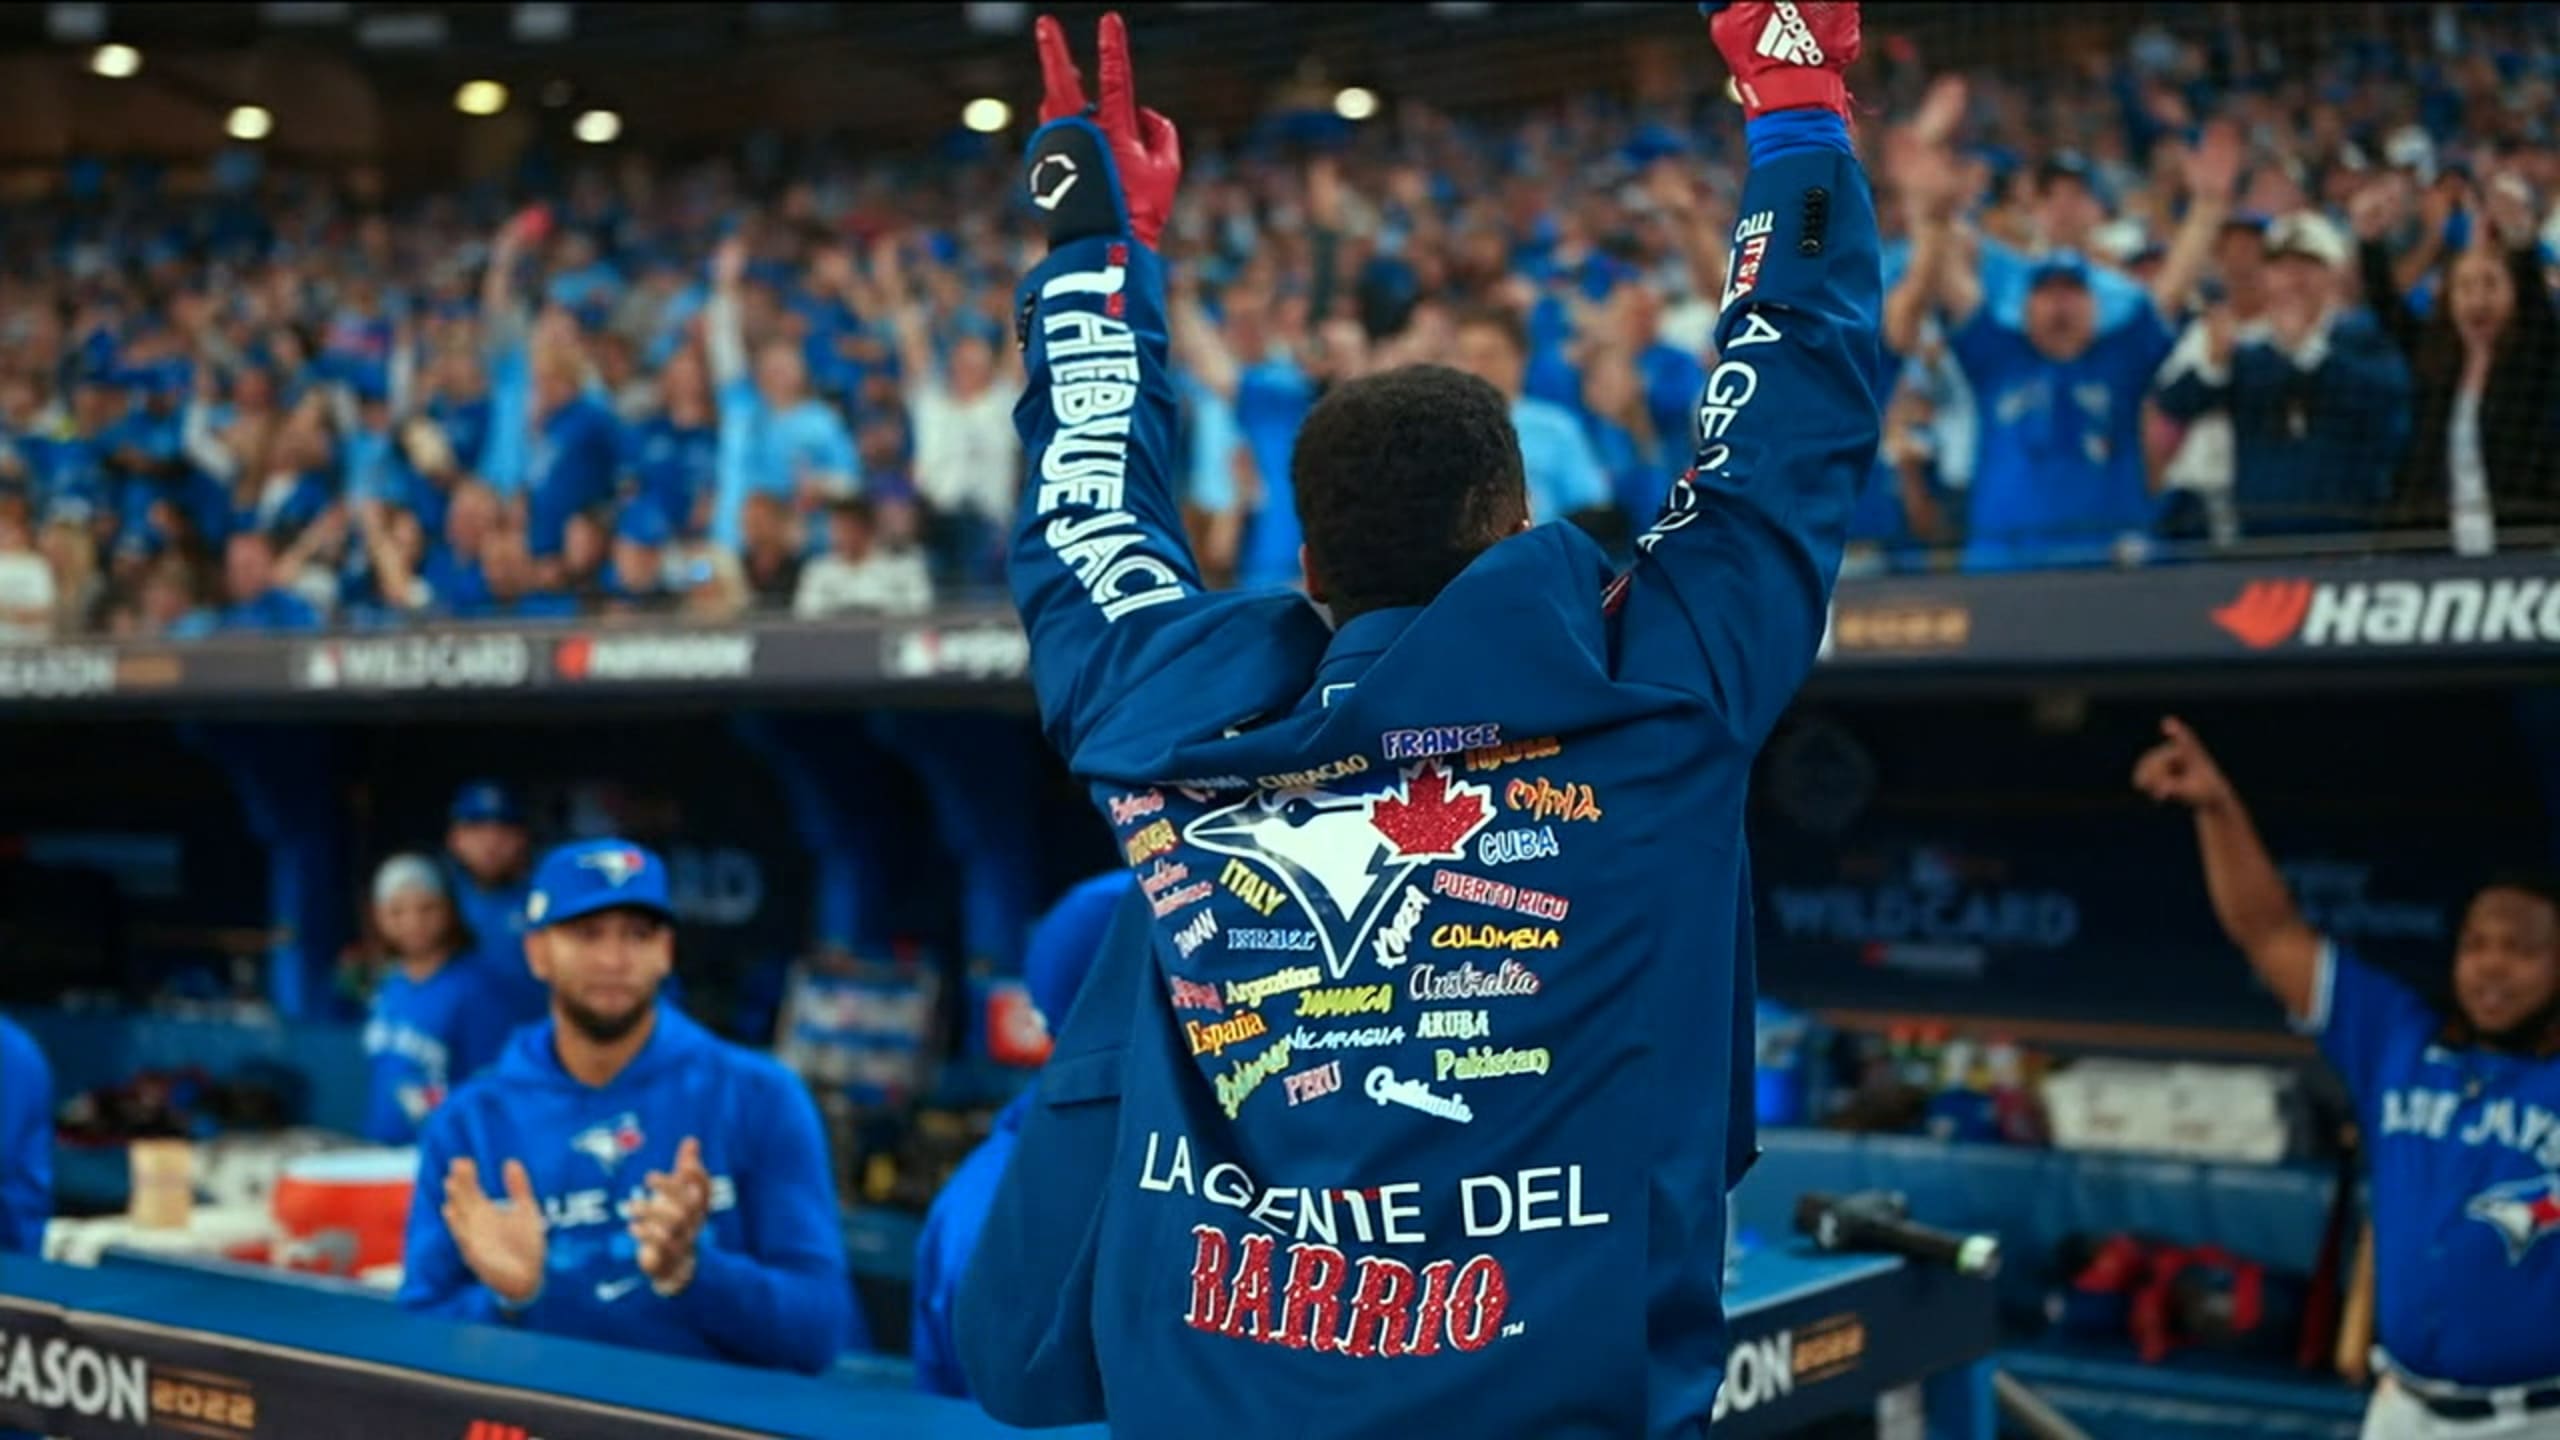 Mariners offer explanation for selling Blue Jays merchandise